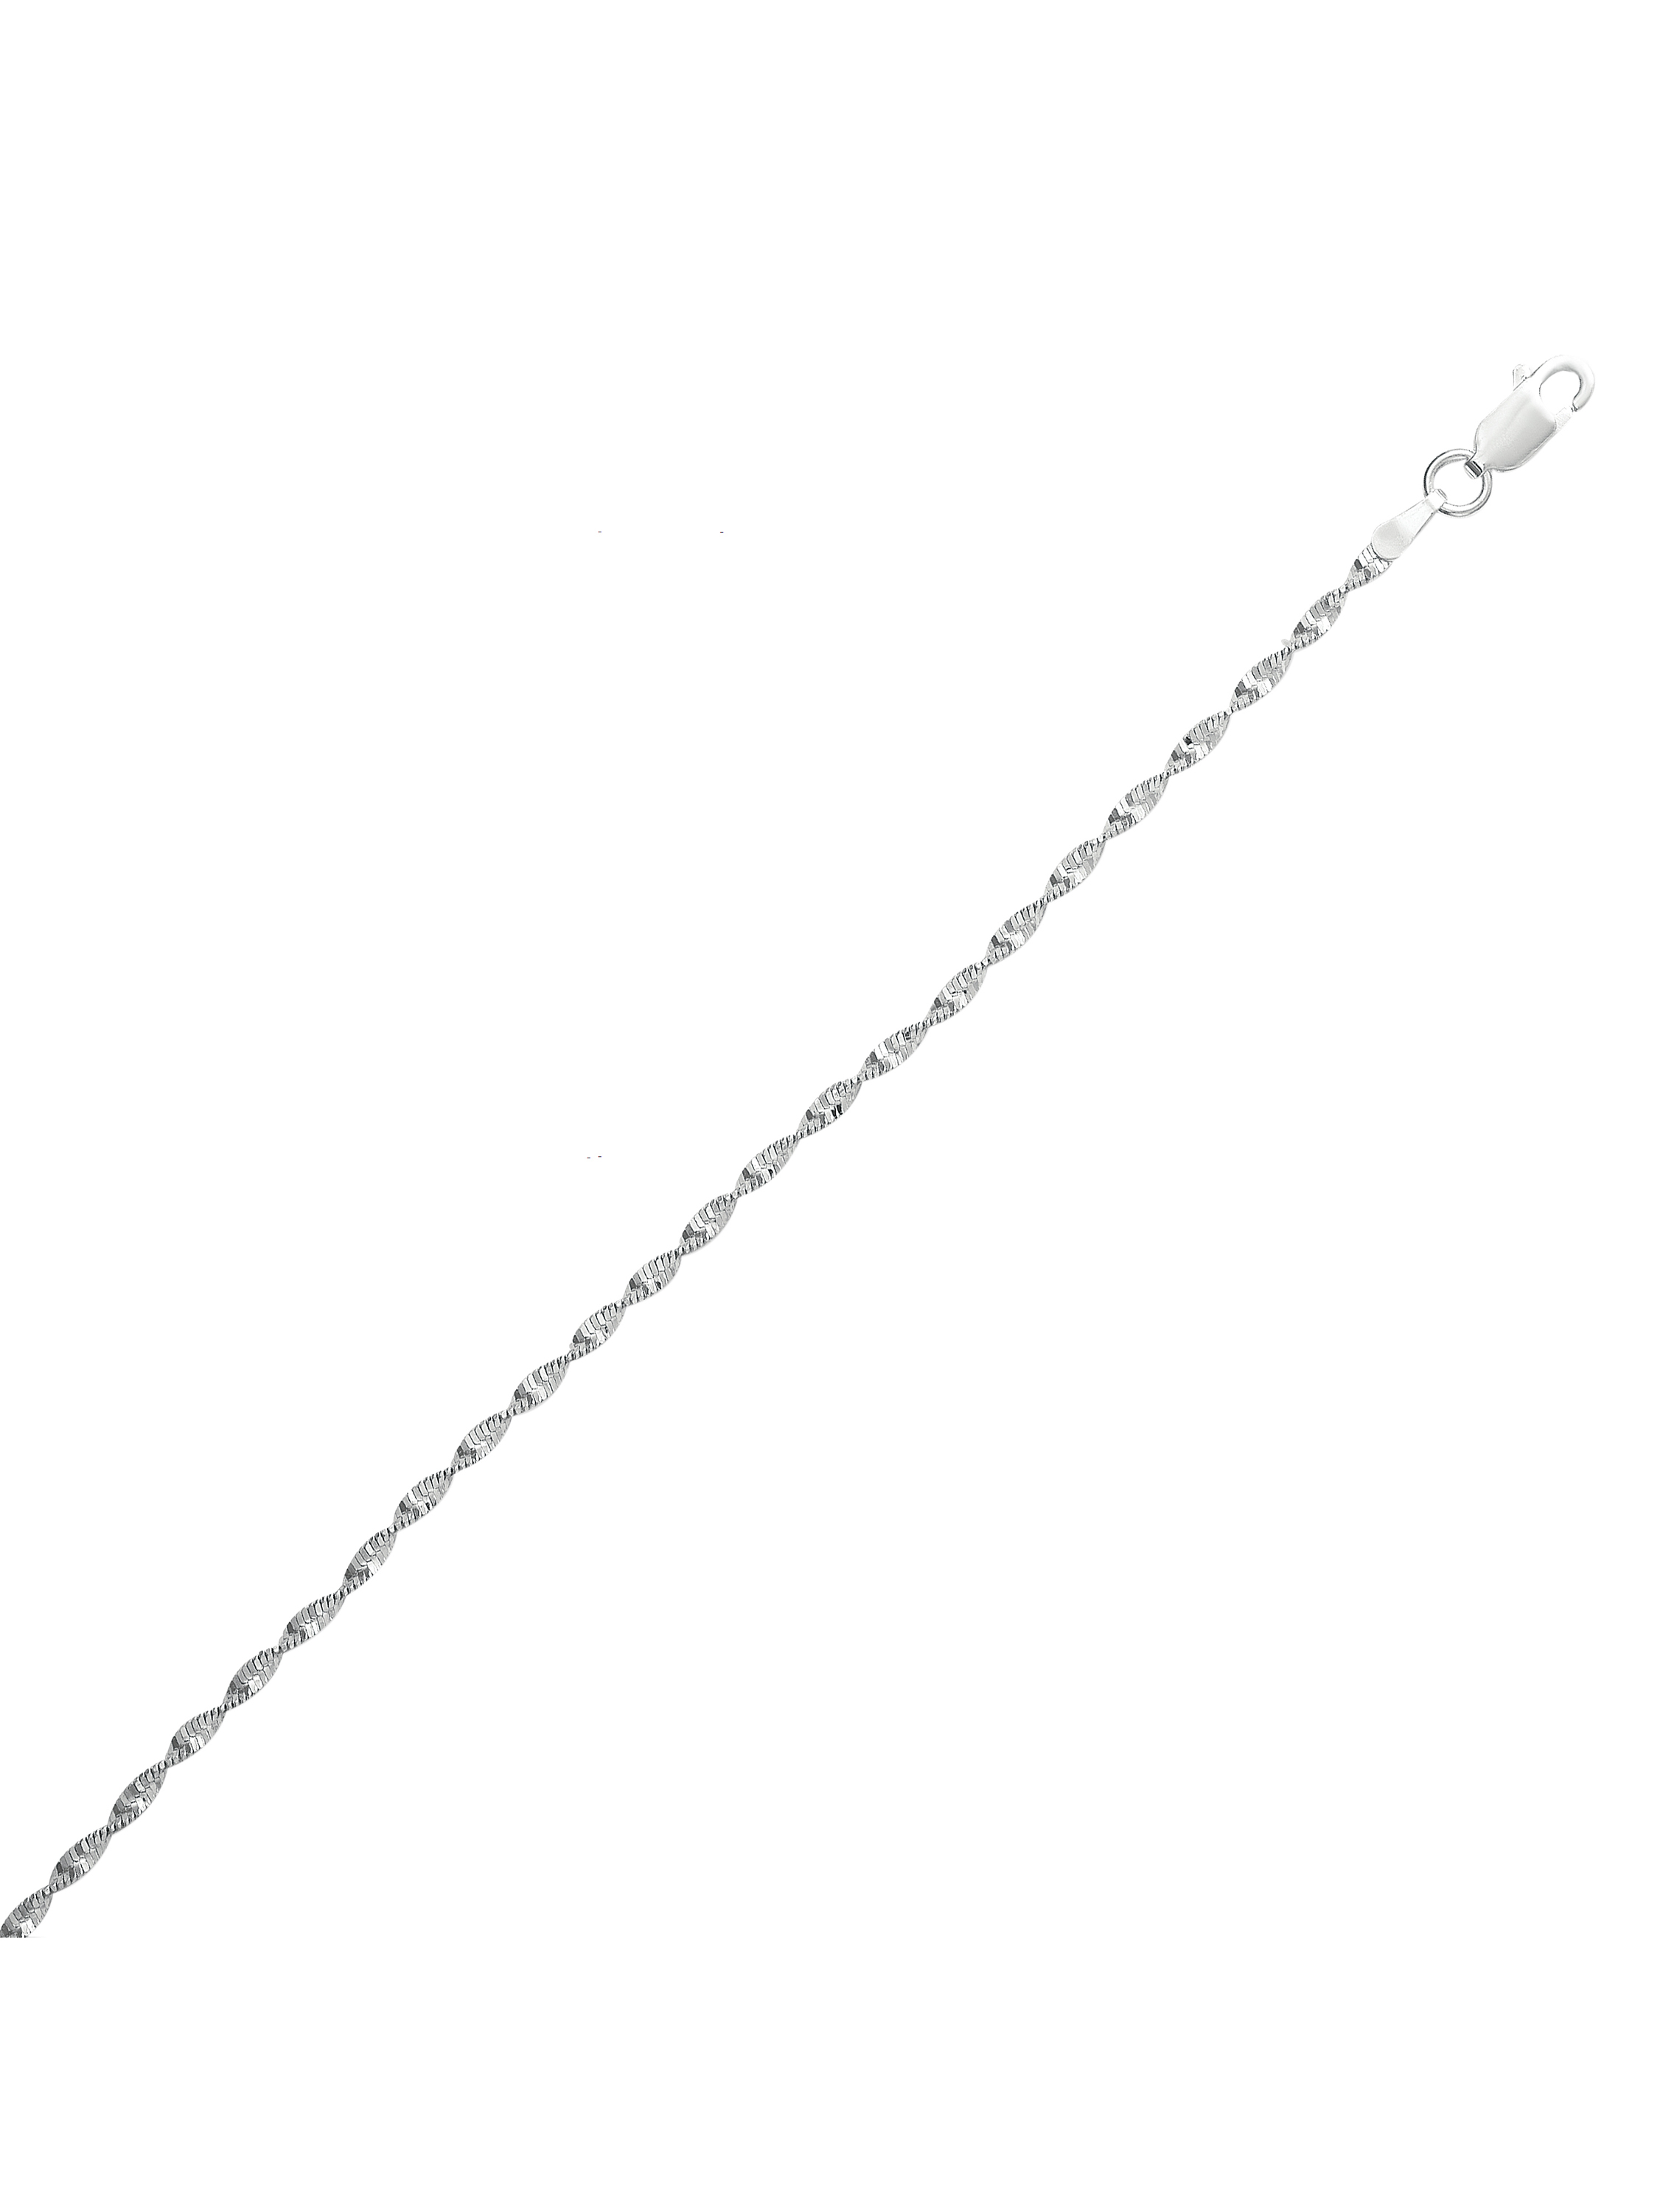 Forever New Sterling Silver 2.5mm Twisted Herringbone Italian Chain Necklace, 7.5" - image 1 of 1